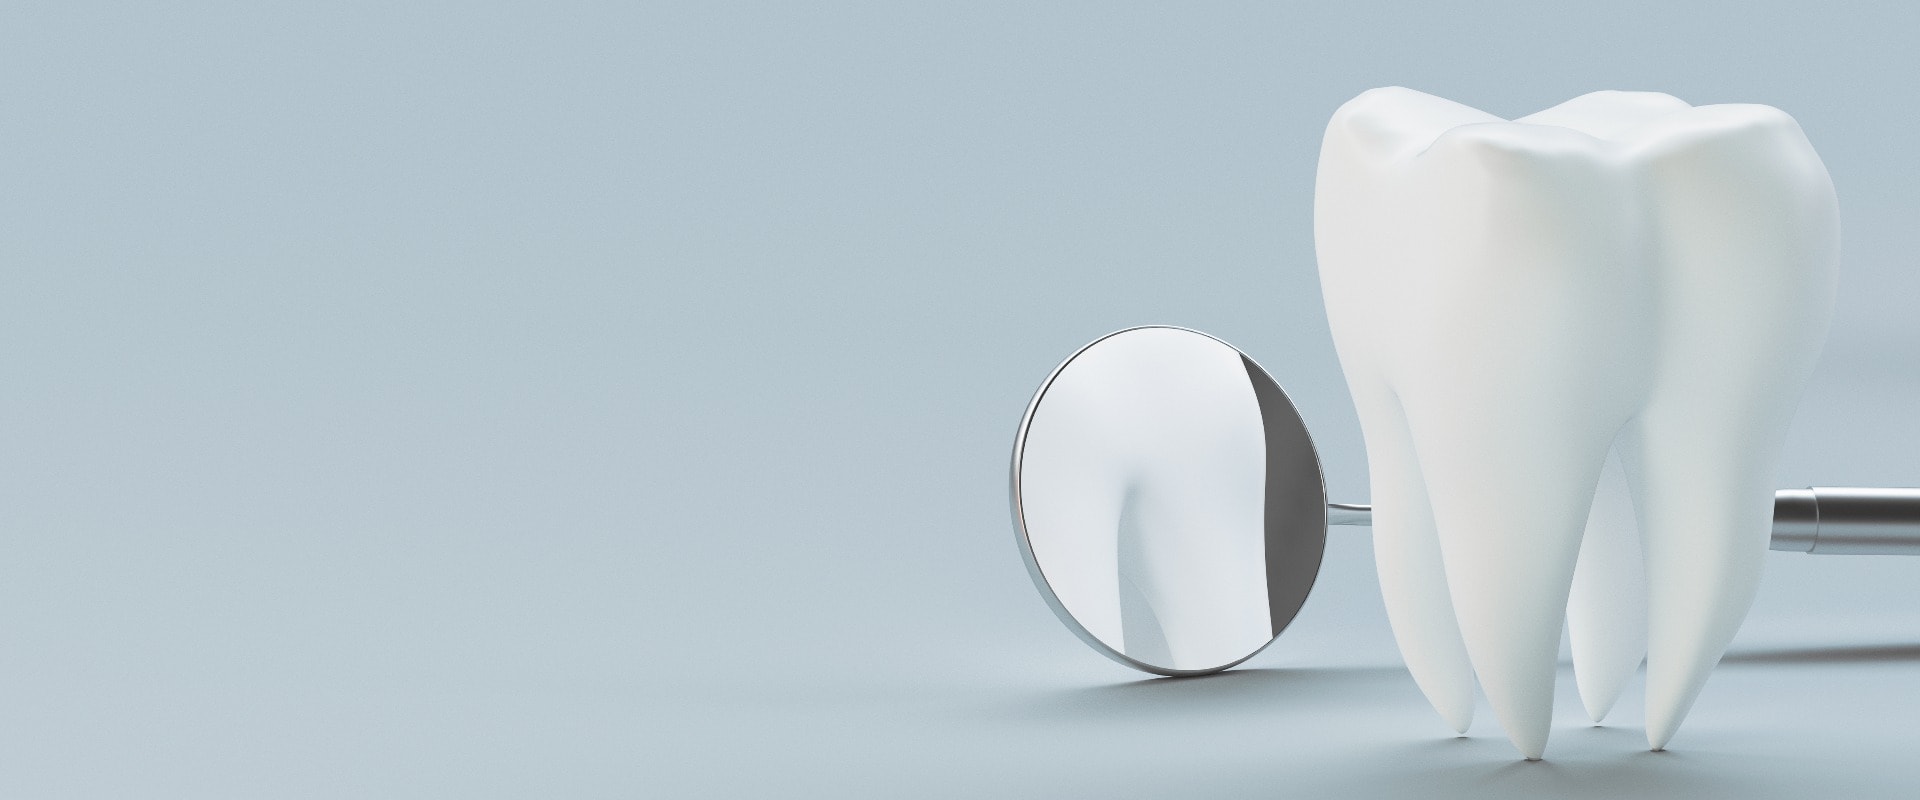 Close-up Of Mirror And Model Tooth Against White Background